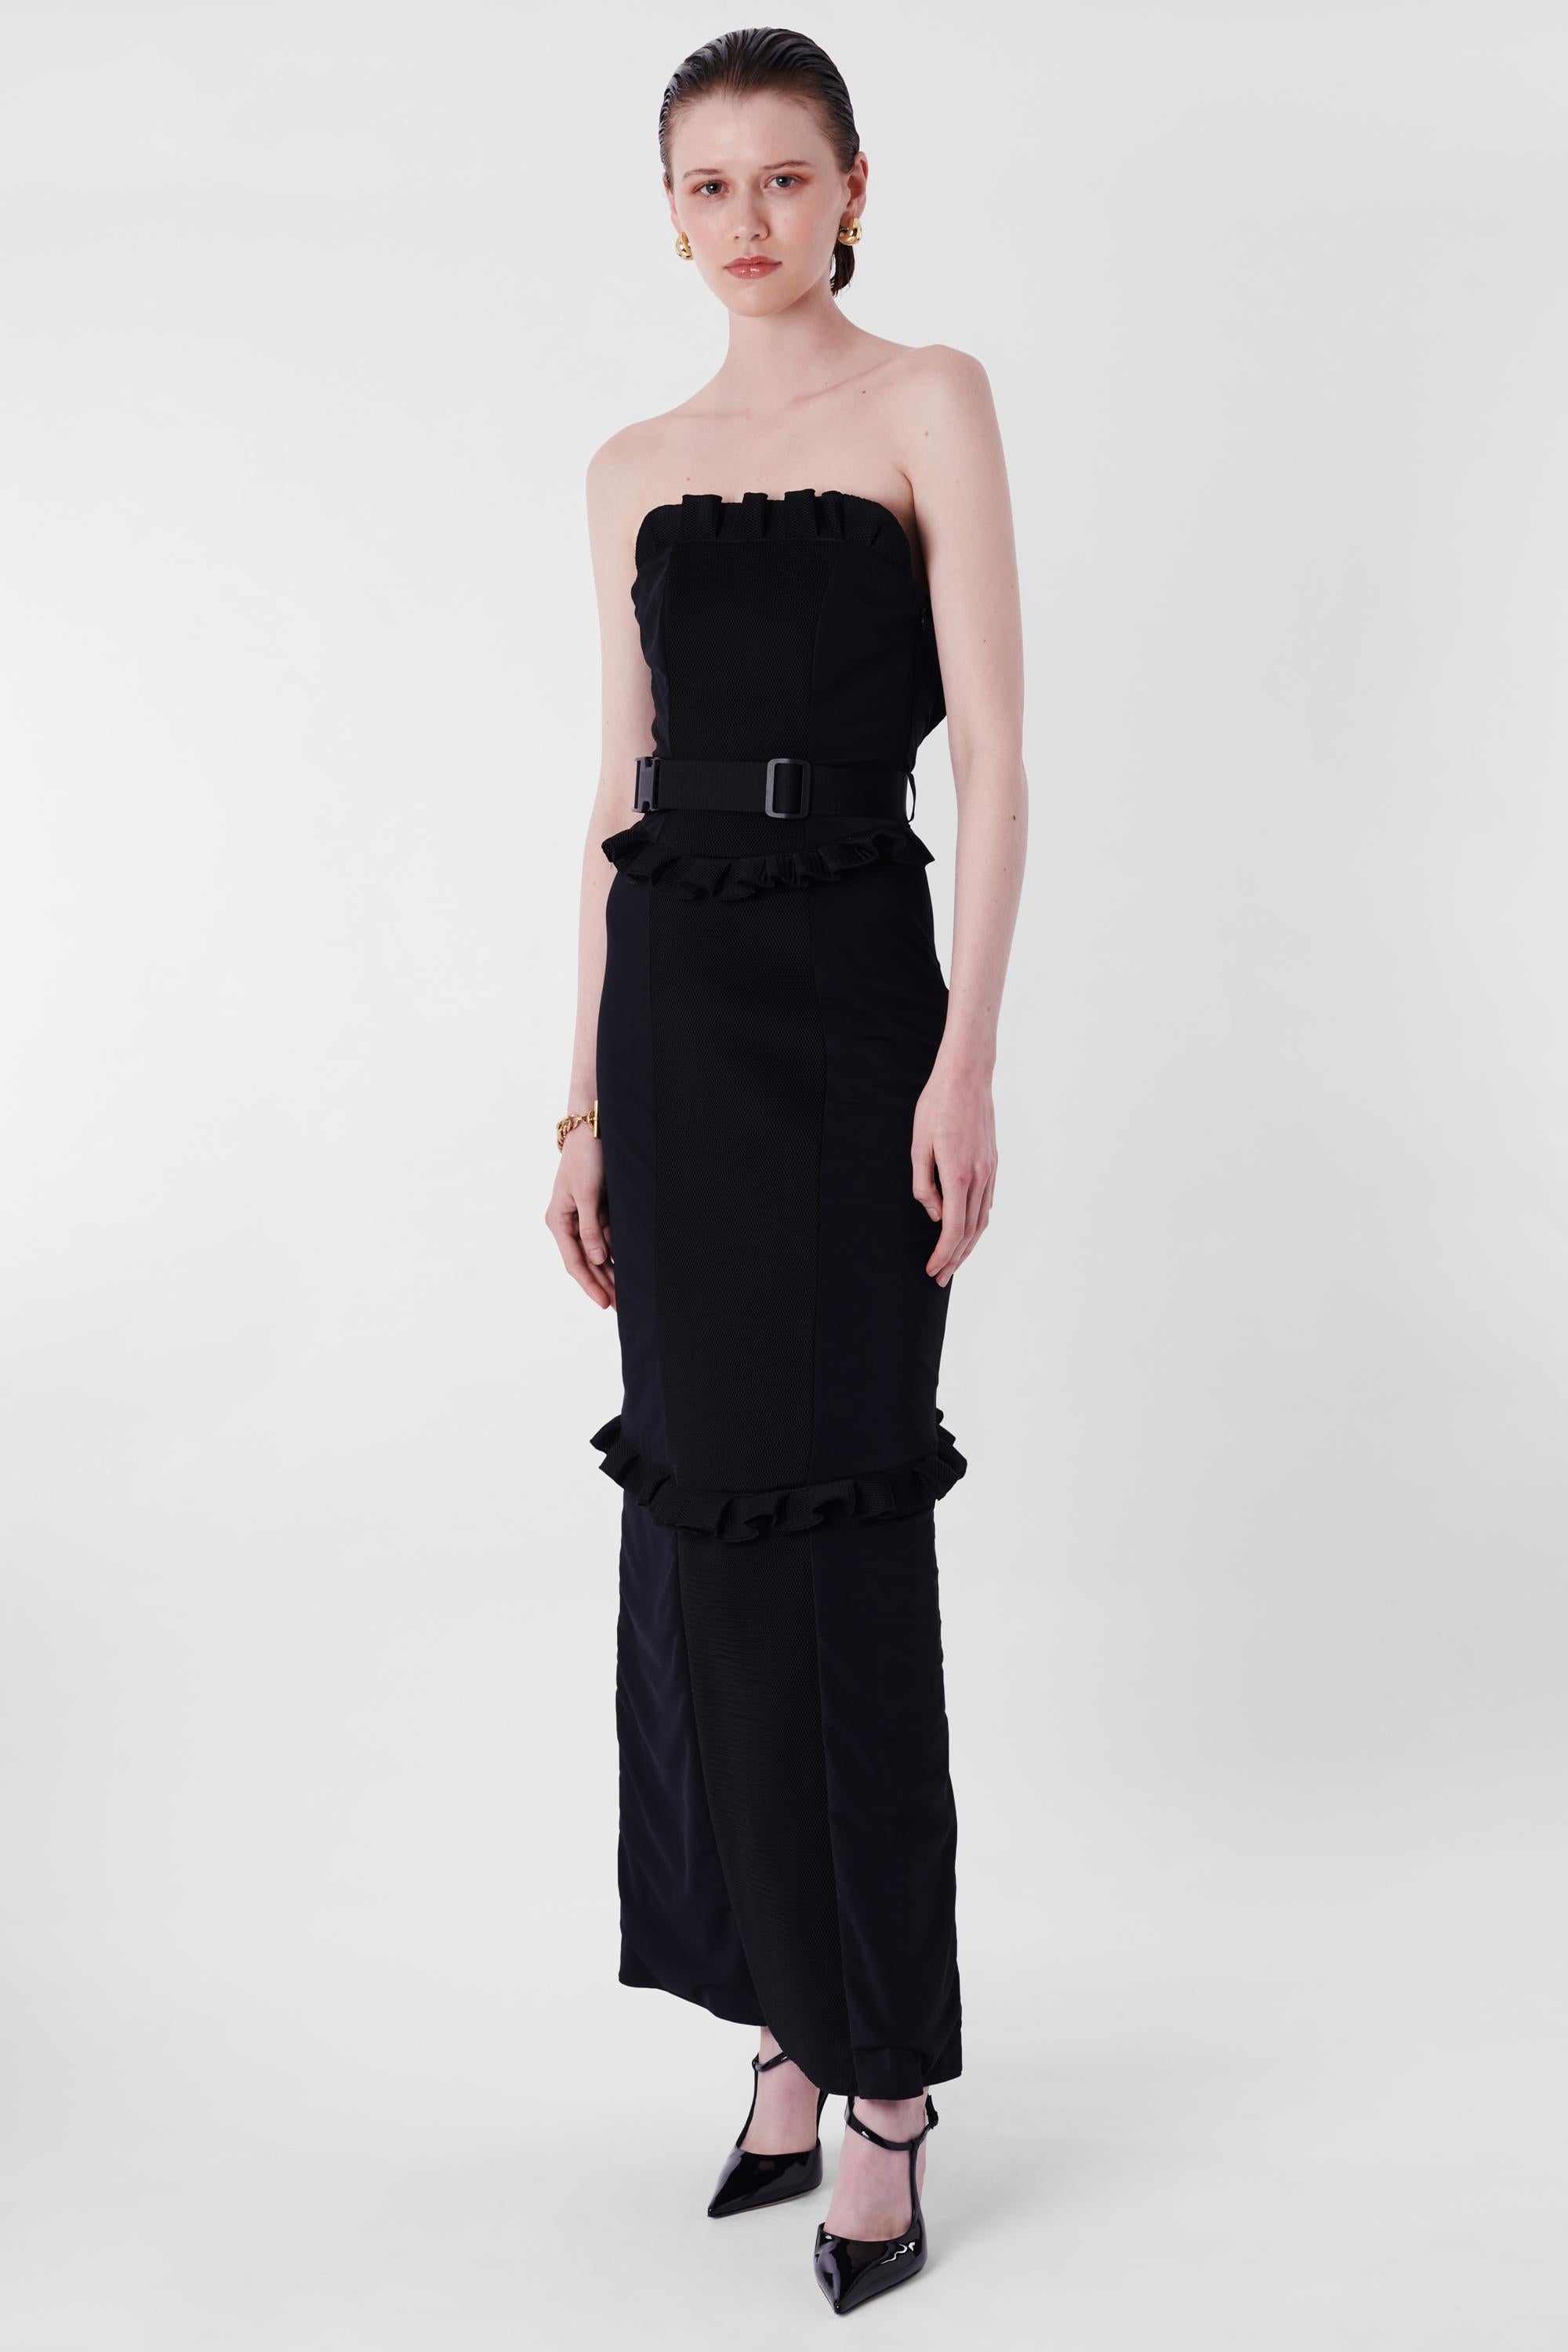 Miu Miu A/W 1999 Runway Black Ruffled Strapless Maxi Dress. Features strapless top with ruffles, contrast net fabric and neoprene, back pocket and buckle waist belt, open back with concealed side zipper and maxi length. In excellent vintage